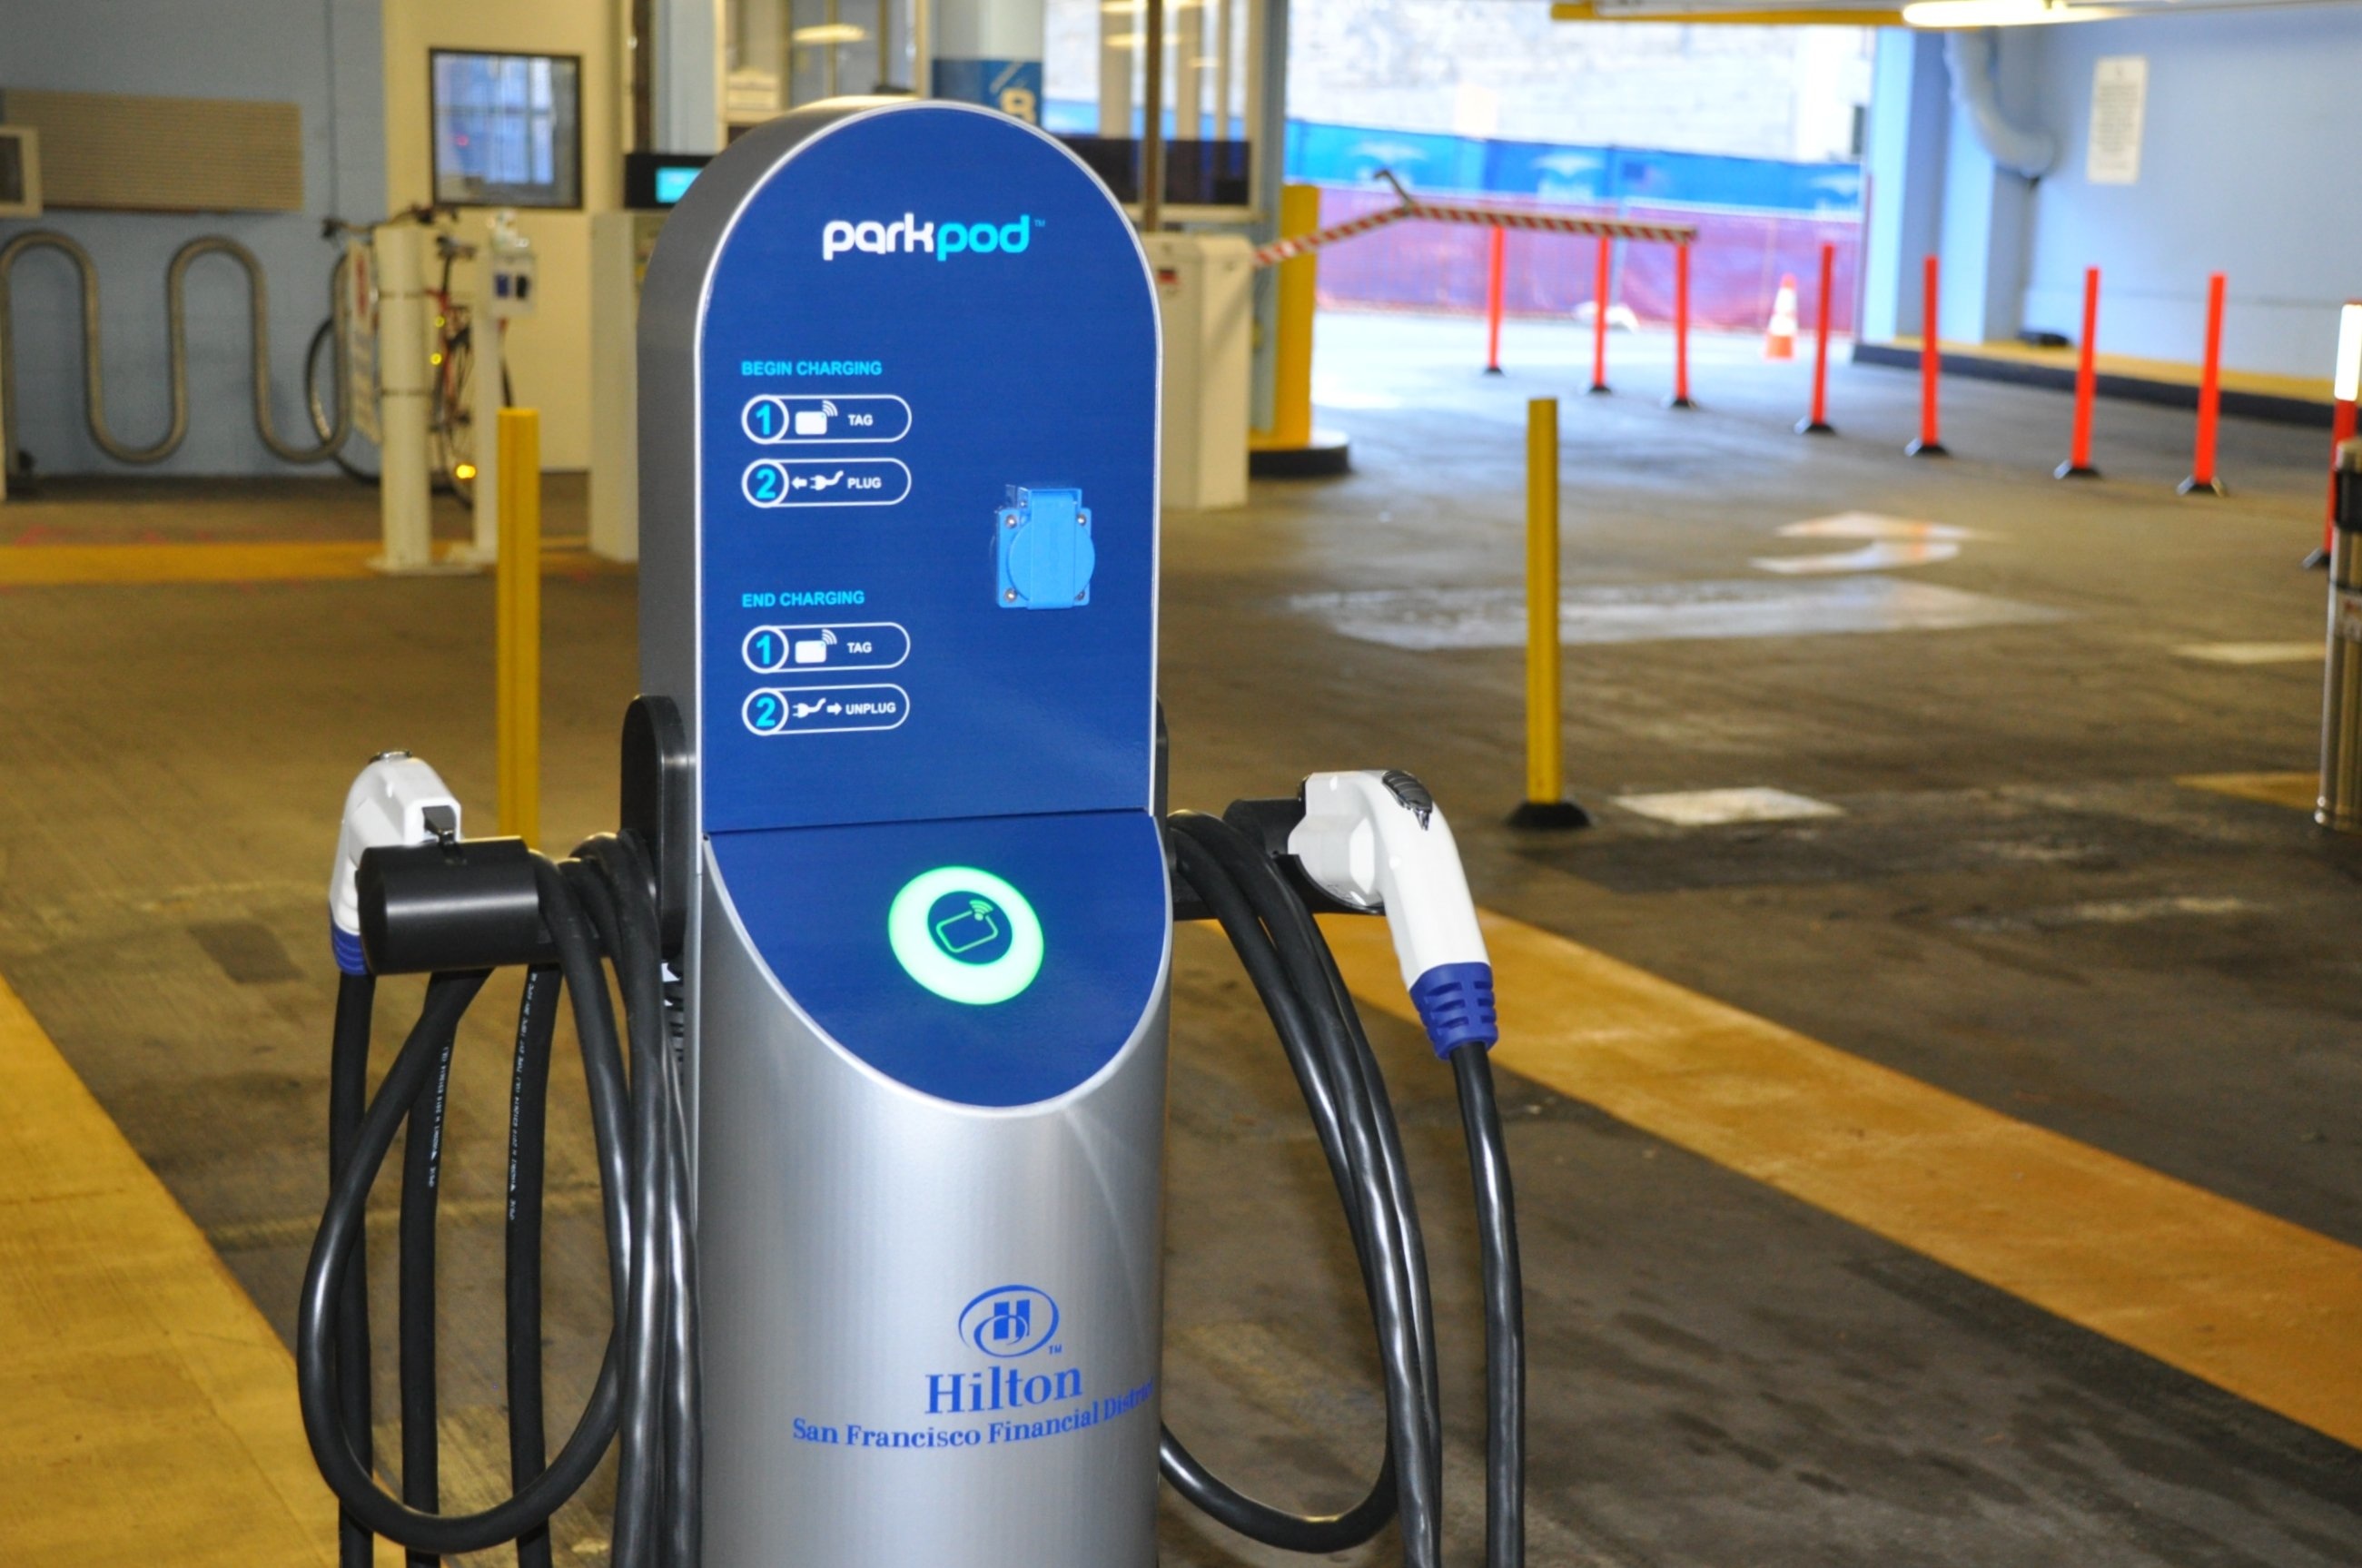 High Speed Electric Vehicle Charging Station Announced by Hilton San